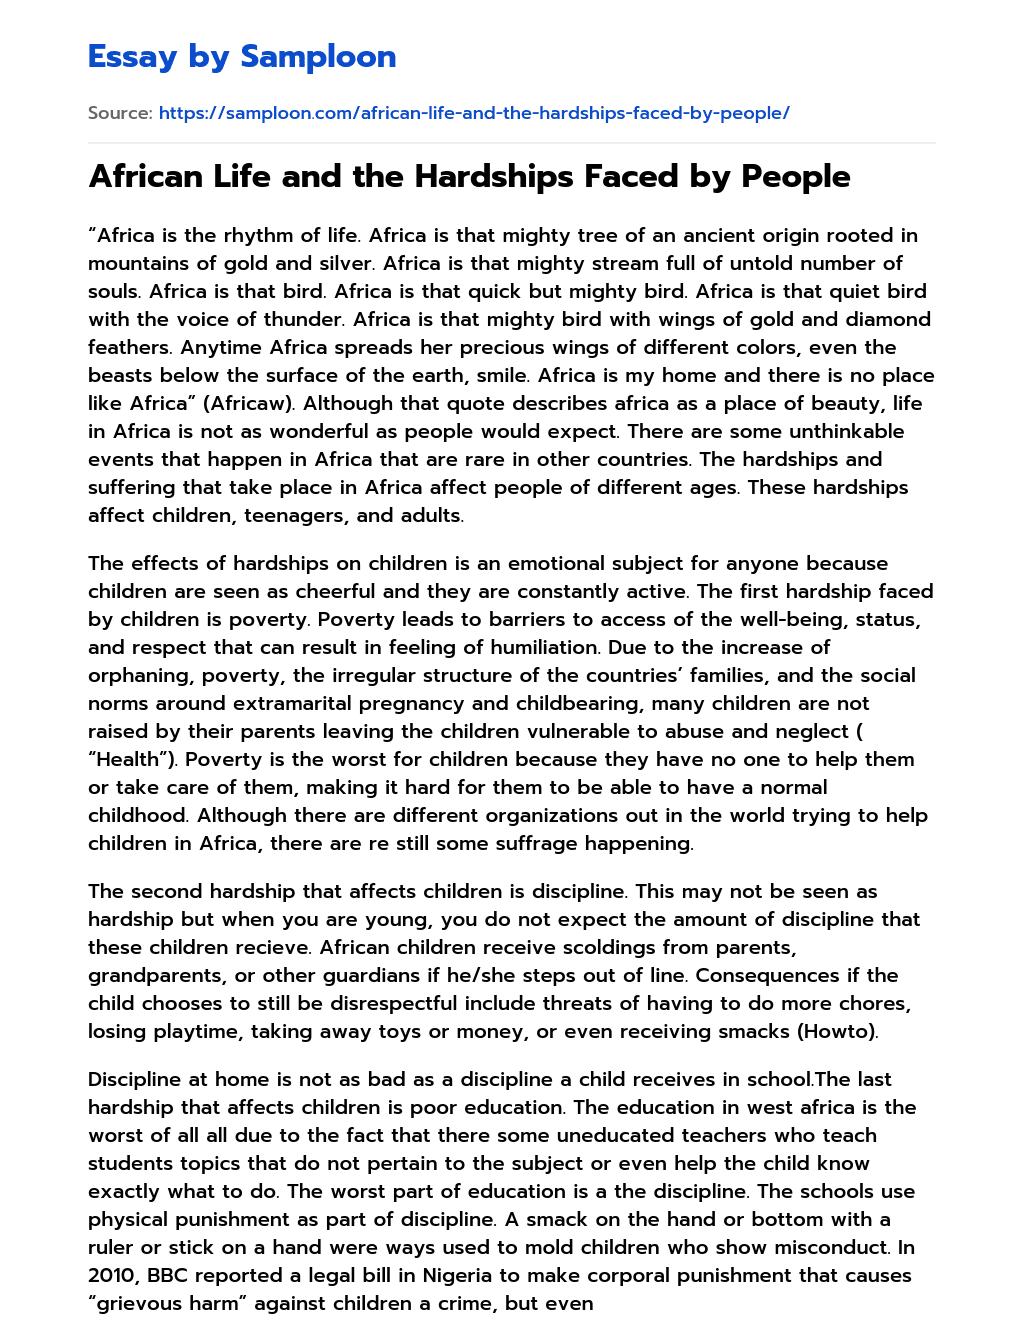 African Life and the Hardships Faced by People  essay